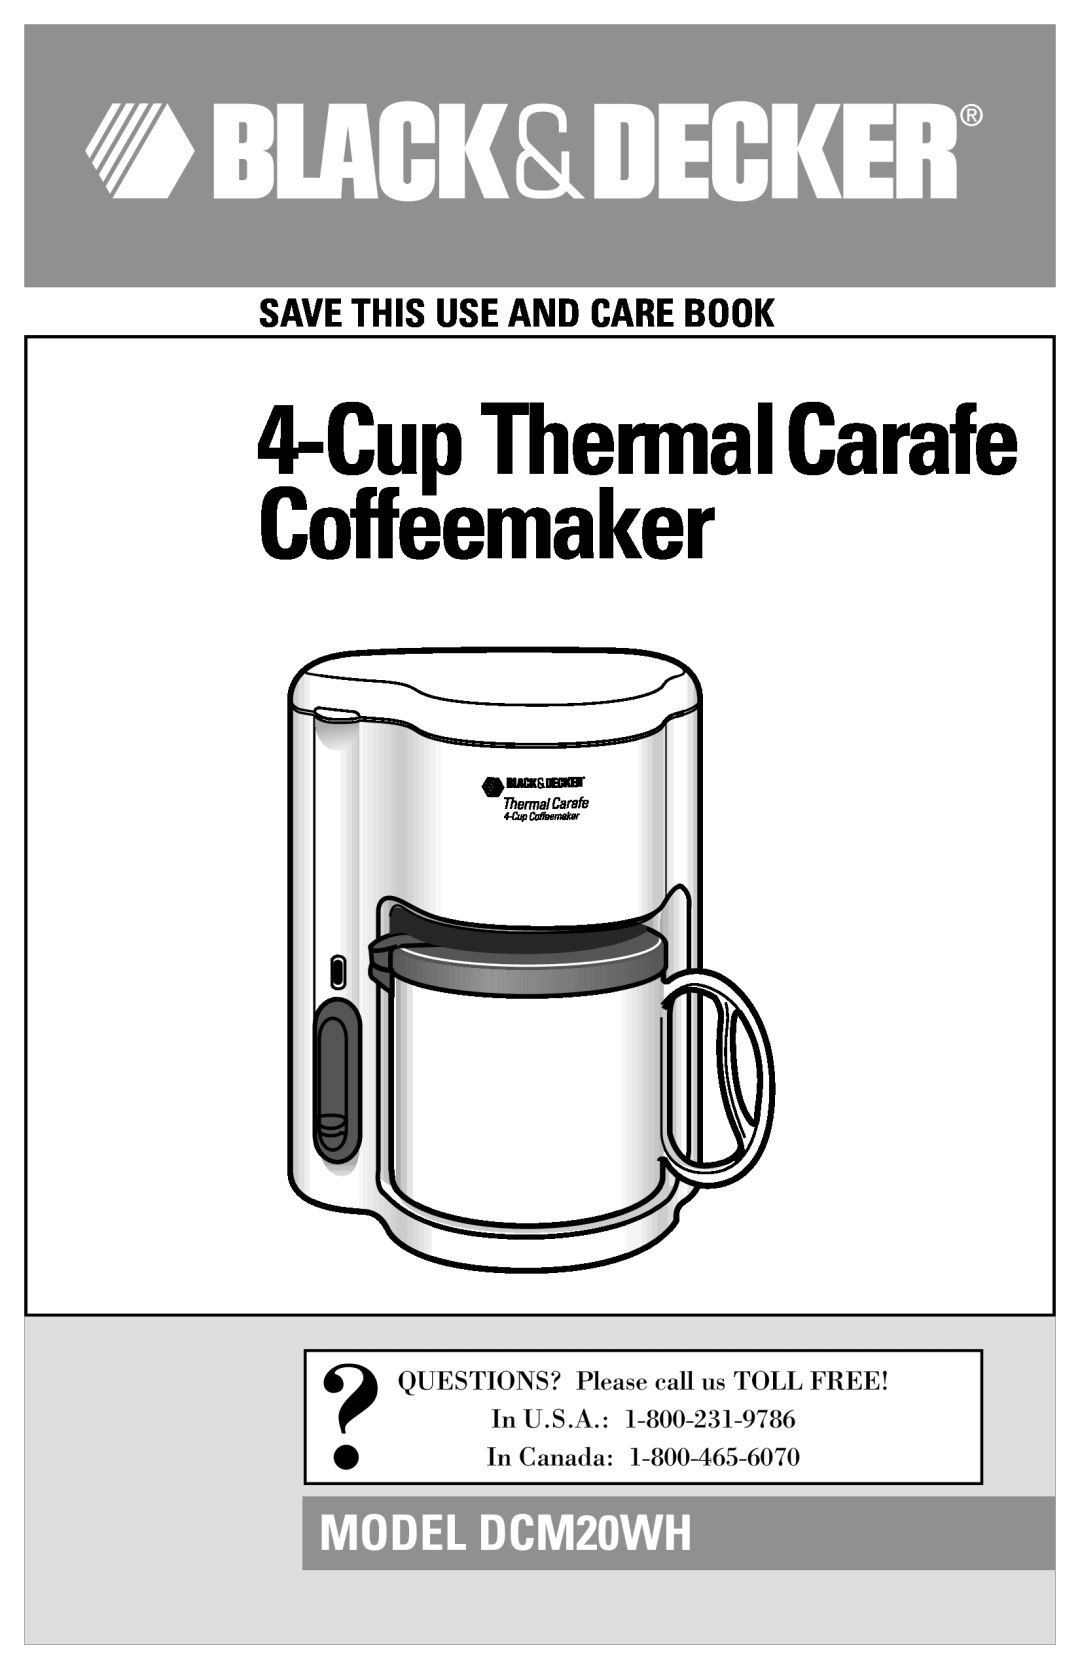 Black & Decker manual Cup ThermalCarafe Coffeemaker, MODEL DCM20WH, Save This Use And Care Book 